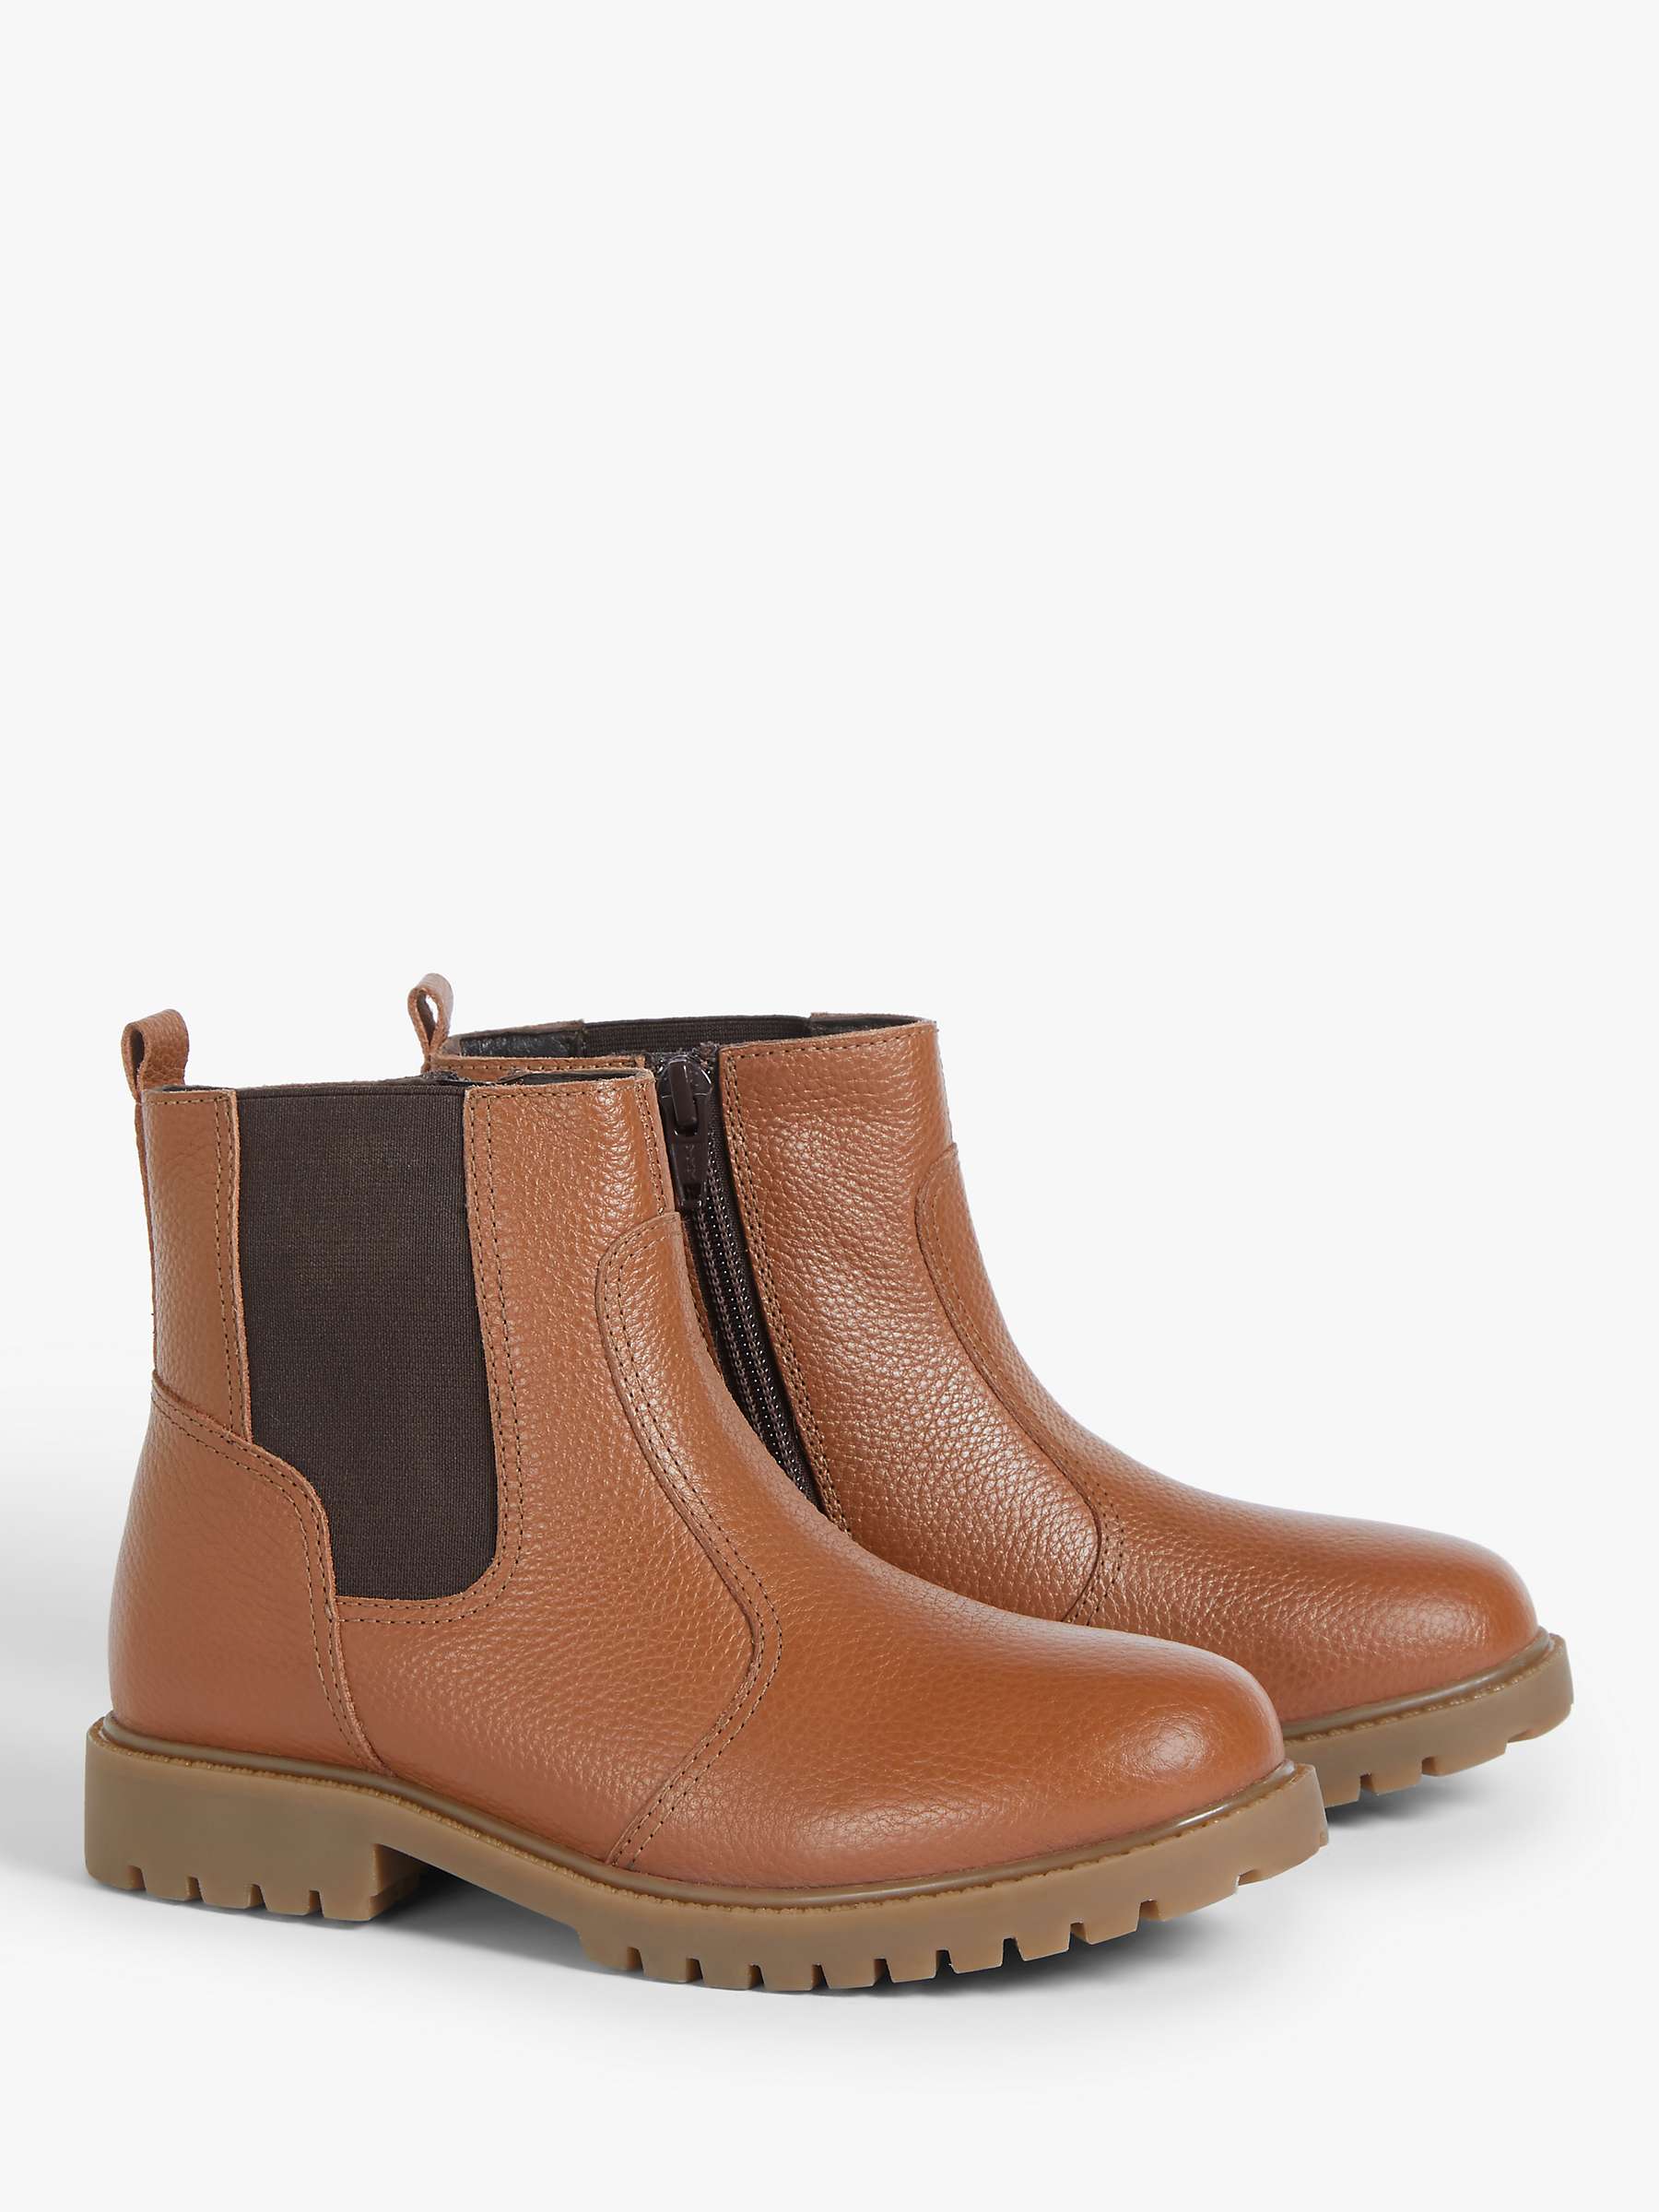 Buy John Lewis Kids' Leather Chelsea Boots Online at johnlewis.com